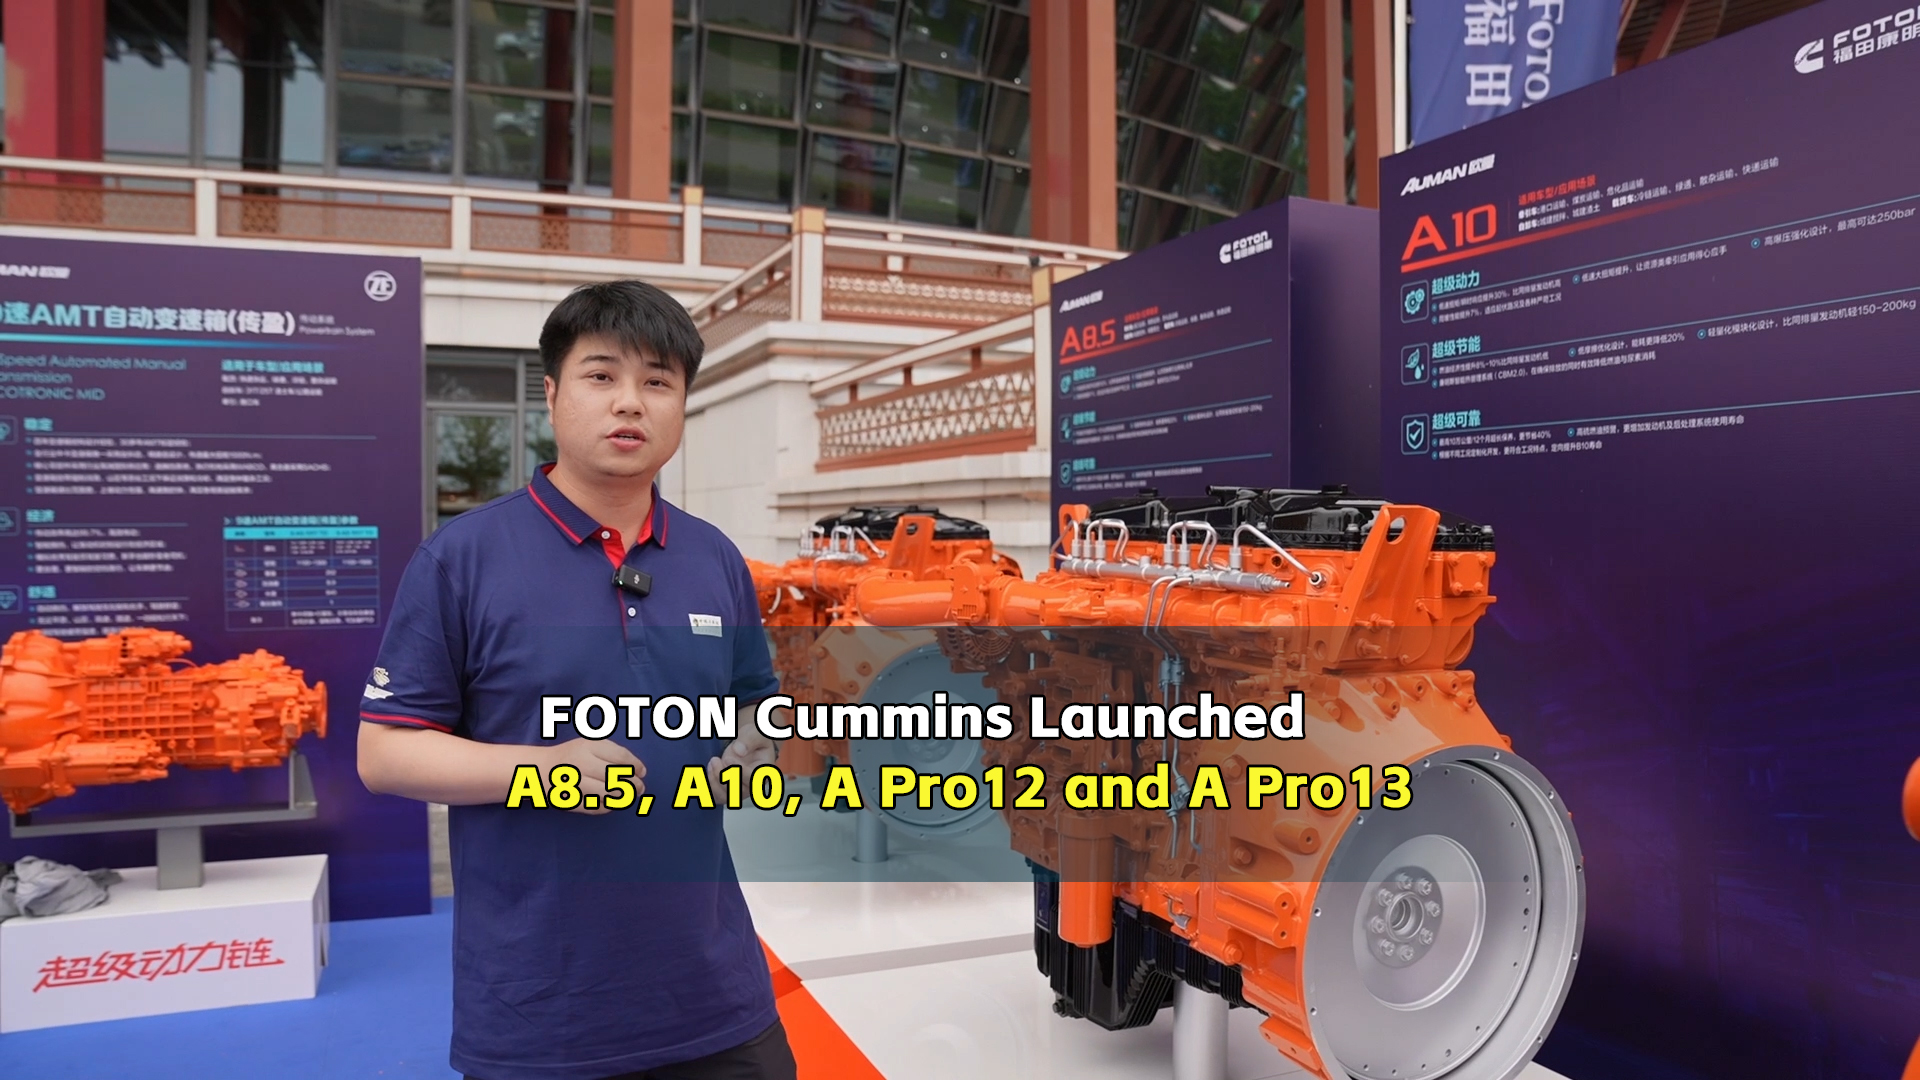 FOTON Cummins Launched 4 New Engines